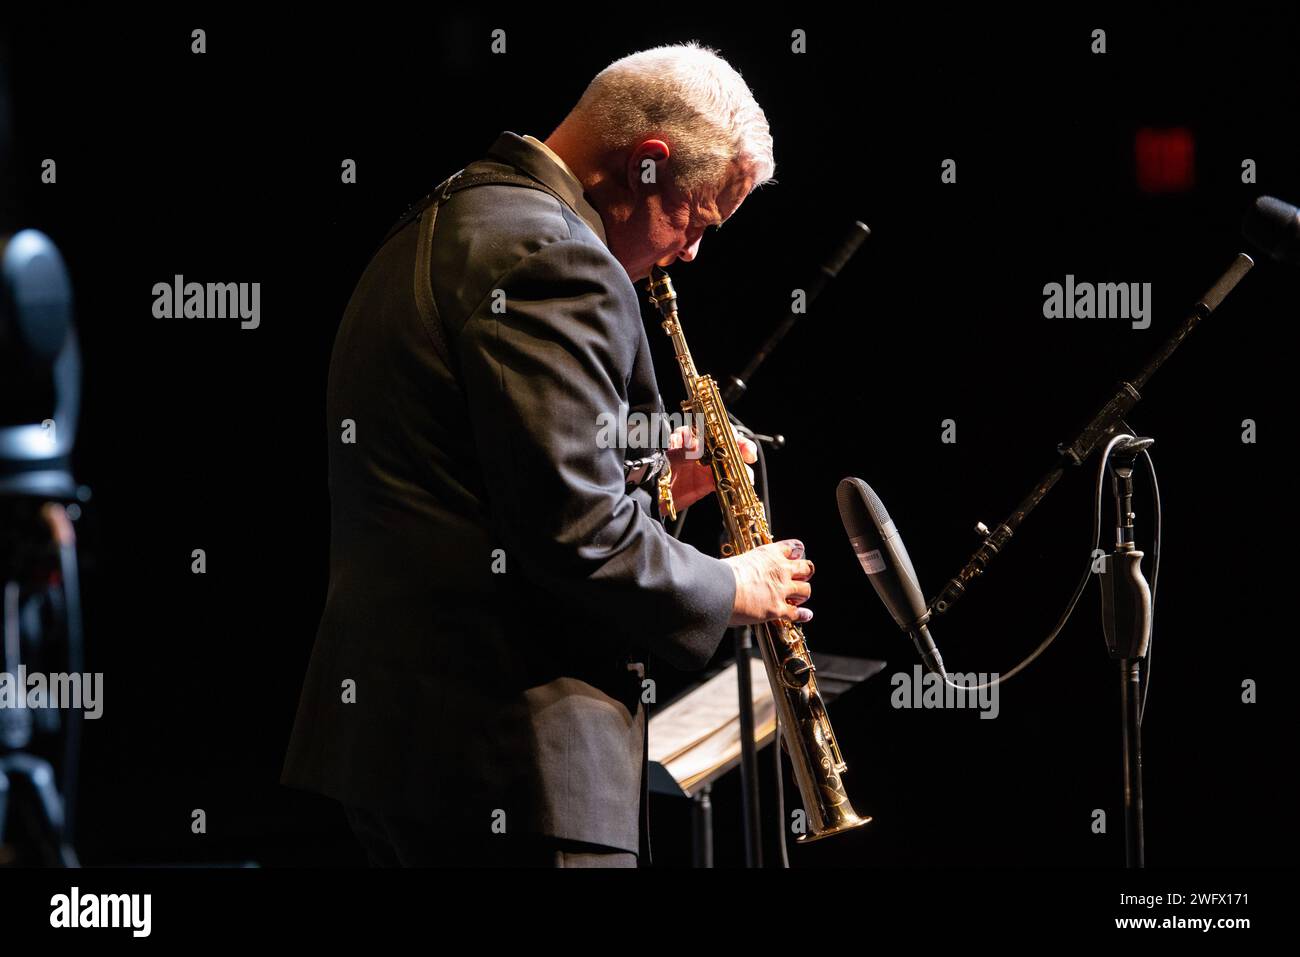 240113-N-NO246-9309 FAIRFAX, Va. (January 13, 2024) Senior Chief Musician Robert Holmes, from McLean, Va., performs with the U.S. Navy Band Commodores. The Navy Band presented this concert at its annual Saxophone Symposium. Stock Photo